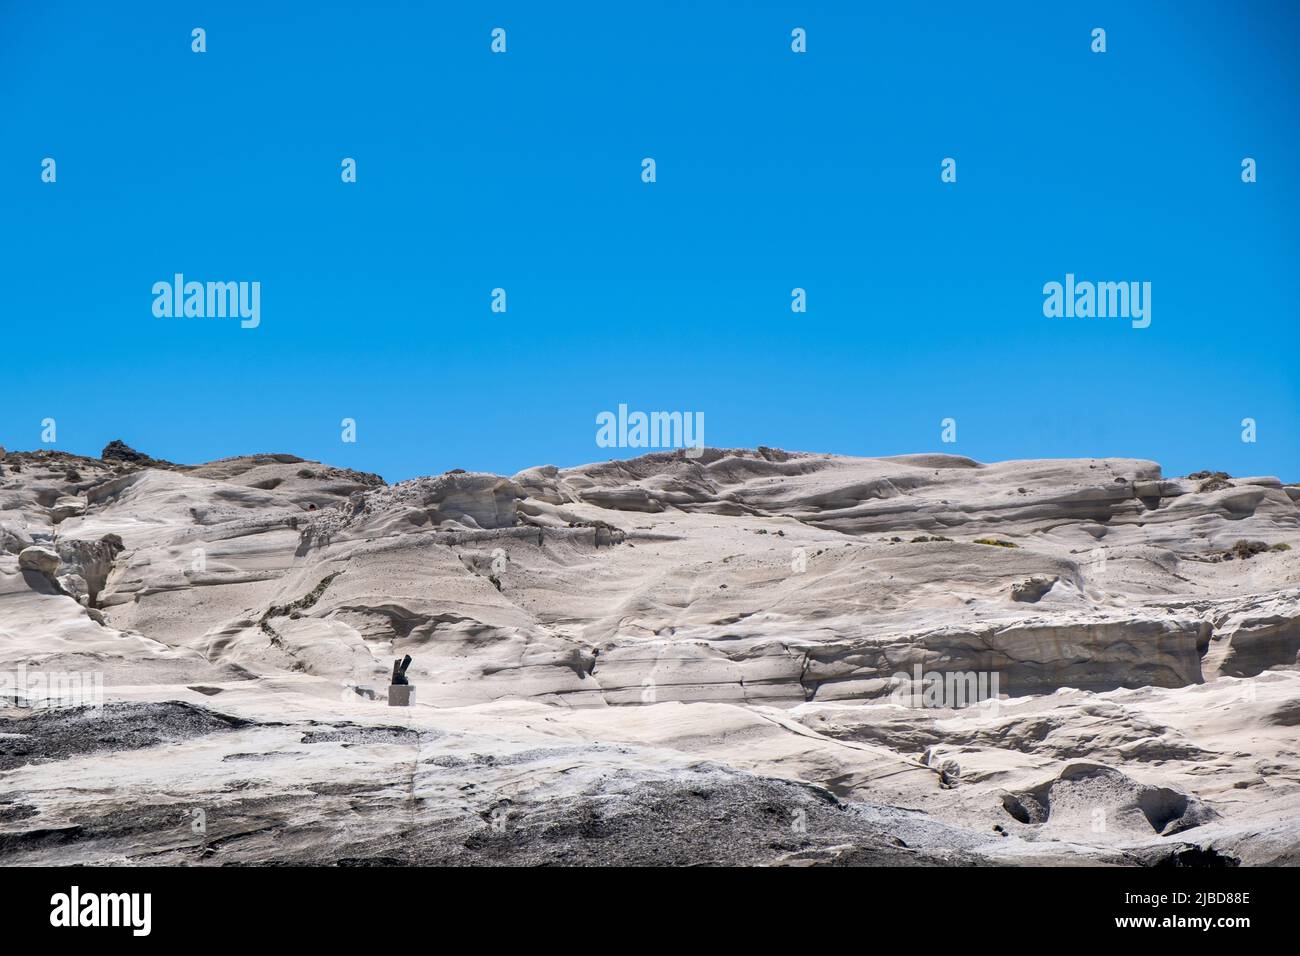 Lunar rock background at Sarakiniko Milos island, Cyclades Greece. Abstract natural white stone formation landscape, clear blue sky Stock Photo